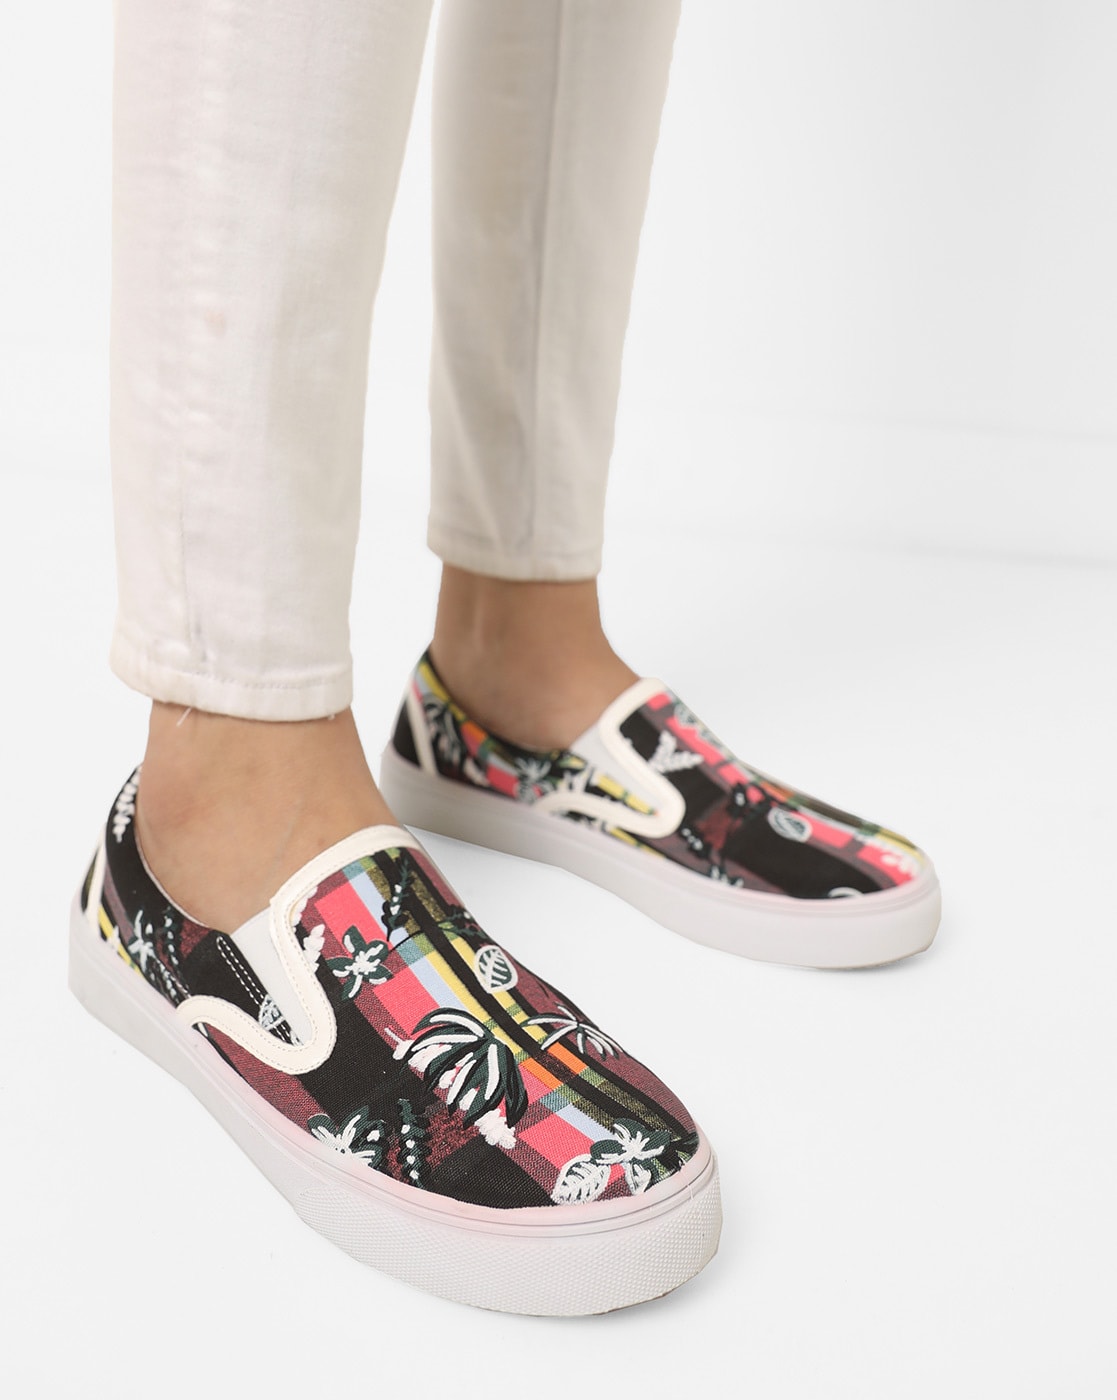 shoes with prints